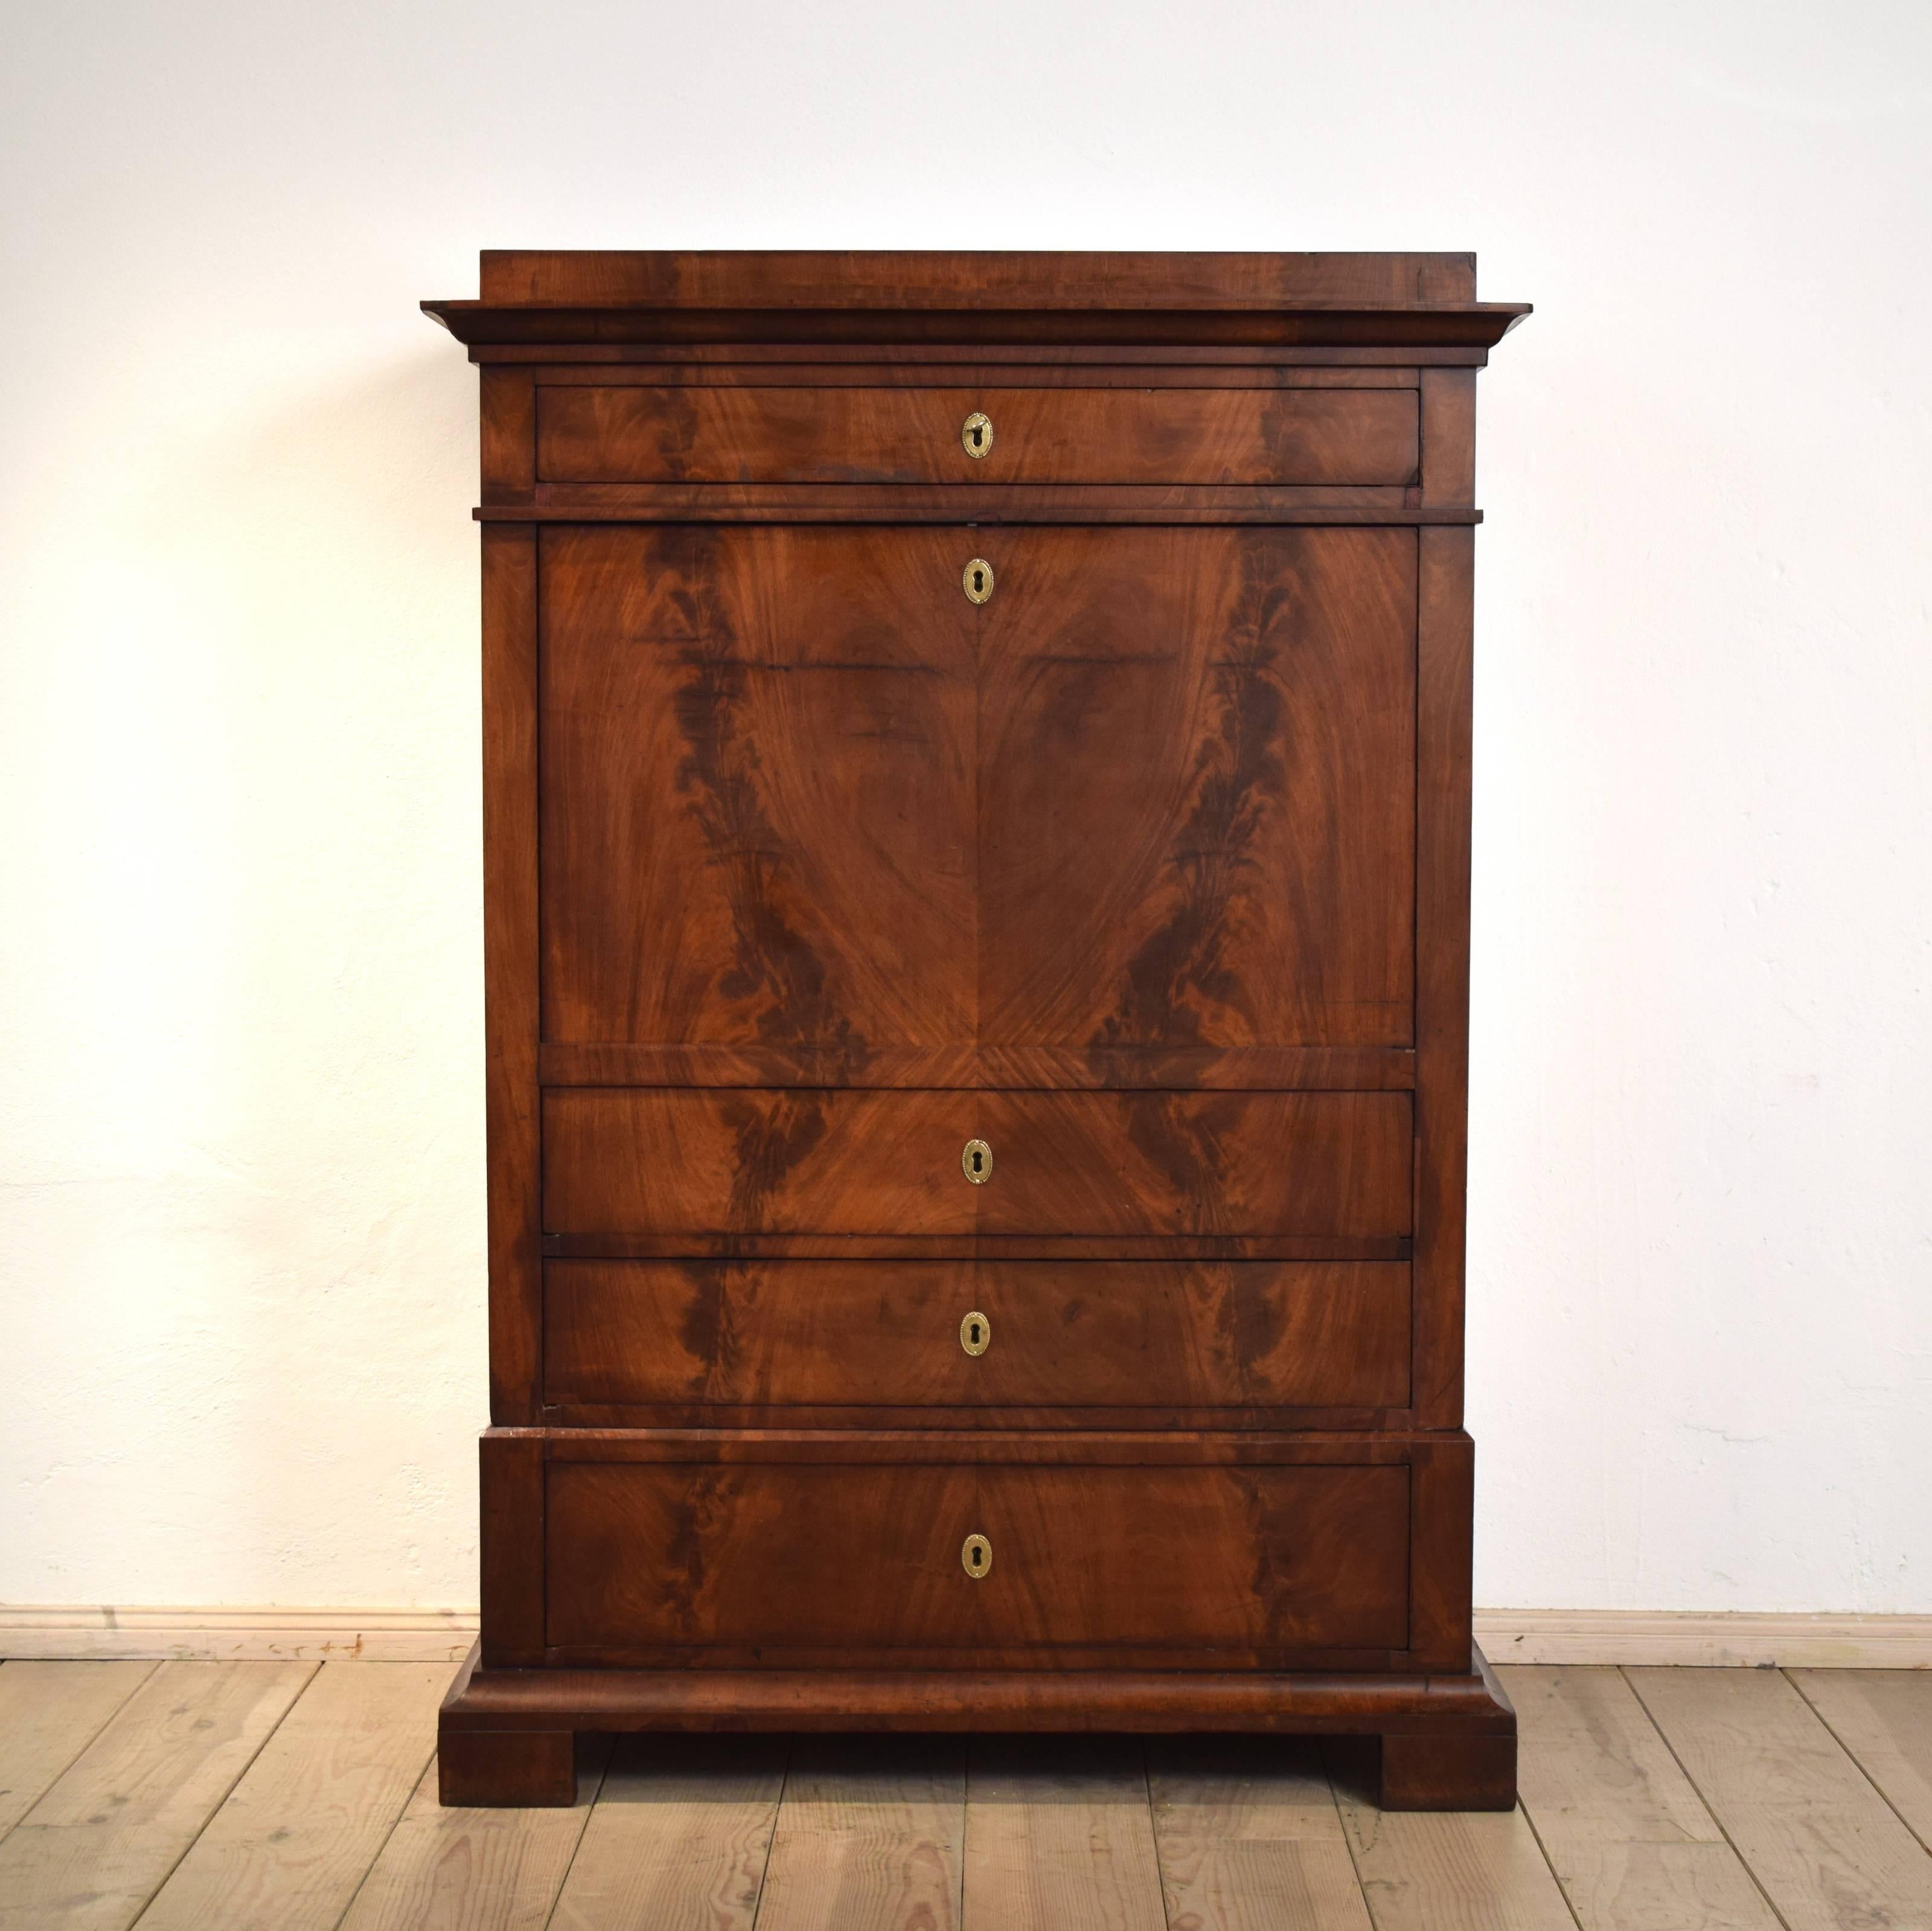 This Empire Secretary was made in Germany, circa 1810. It is mahogany veneer on oak. The architectural design is typical for this period.
A very fine furniture which fits into a modern or classical home.